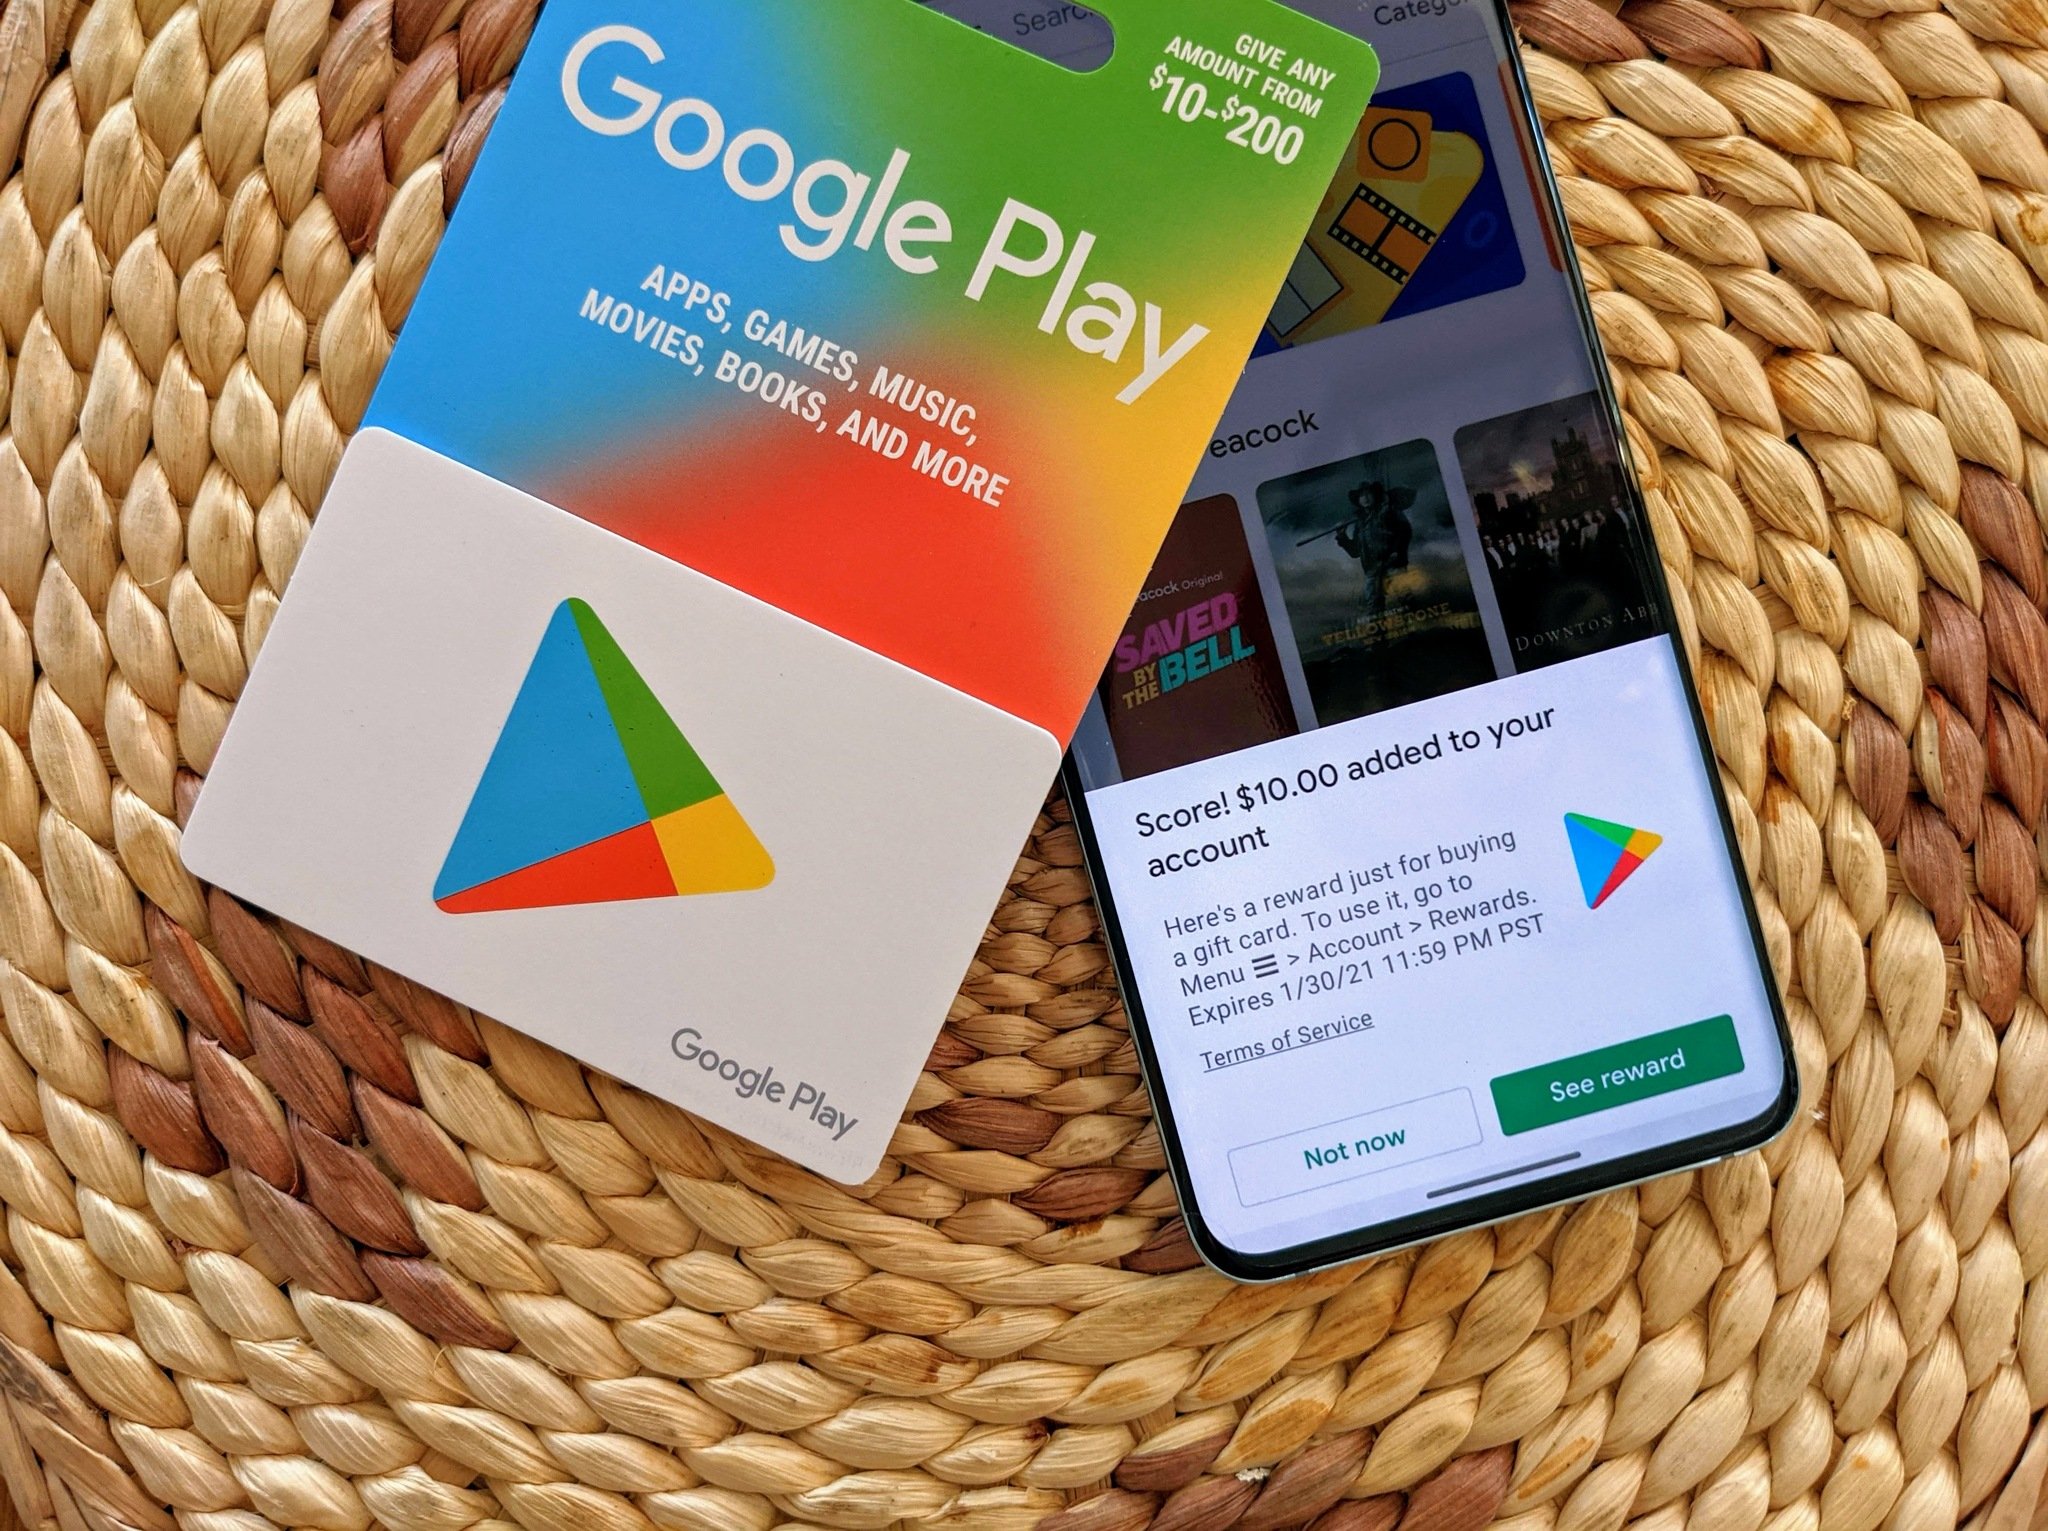 How to get Free Google Play Gift Card with Termux - SPY24